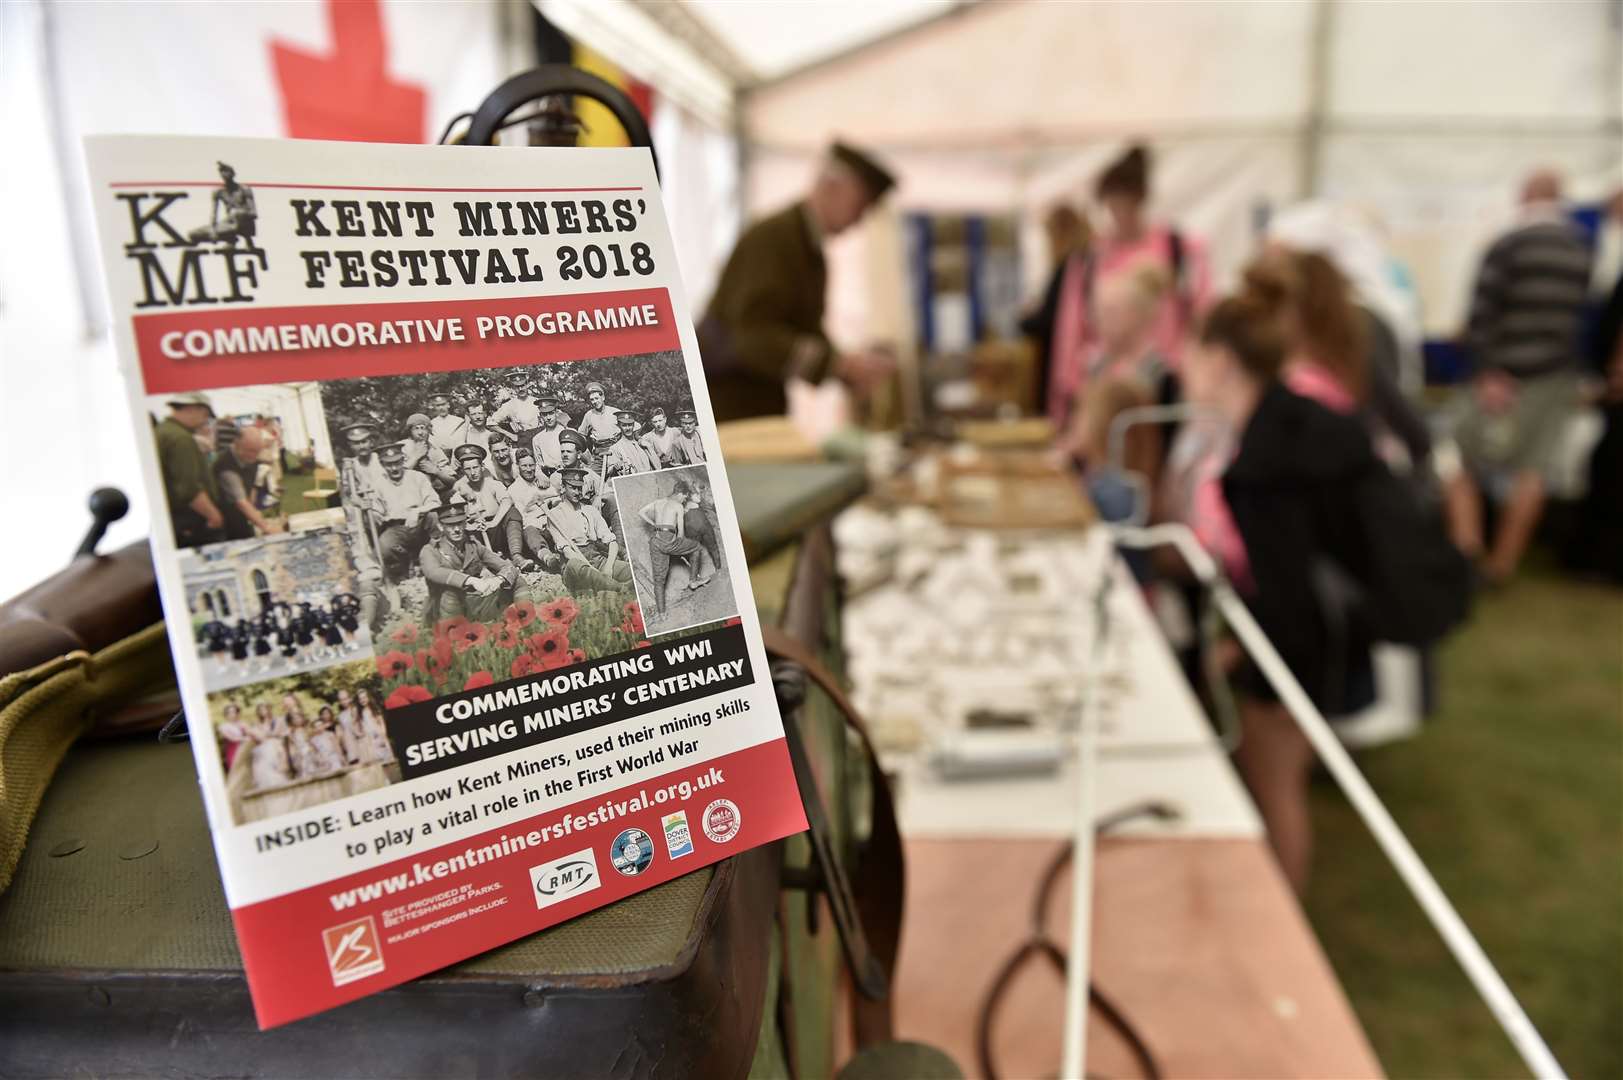 The marquees are a great place to showcase community groups at Kent Miners' Festival